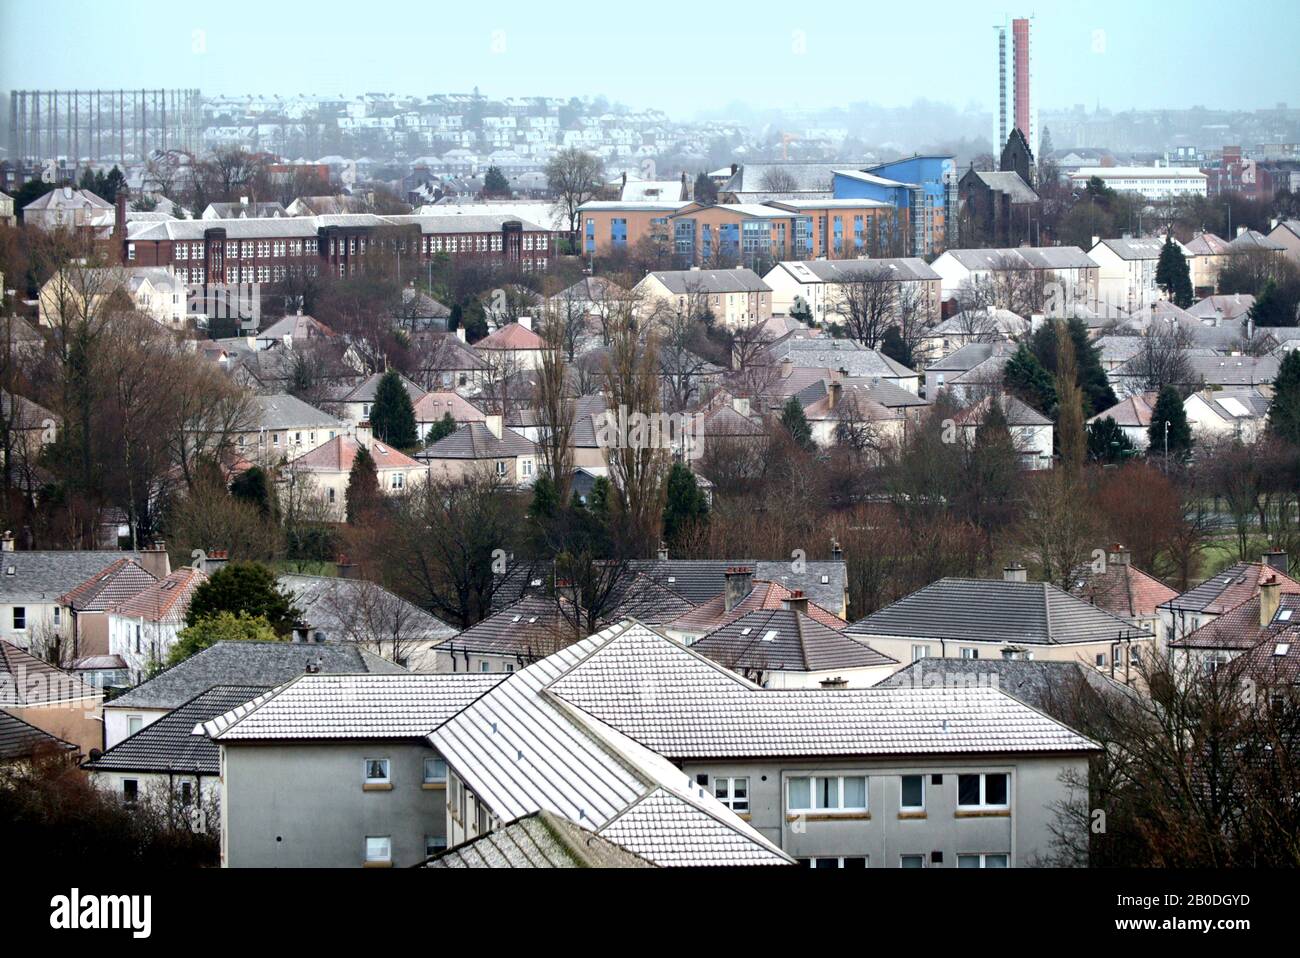 Glasgow, Scotland, UK, 20th February, 2020: UK Weather: Stormy Weather Promised SAW Snow Showers over the West End of the city stoved on the Roofs of Knightswood. Copywrite Gerard Ferry/ Alamy Live News Foto Stock